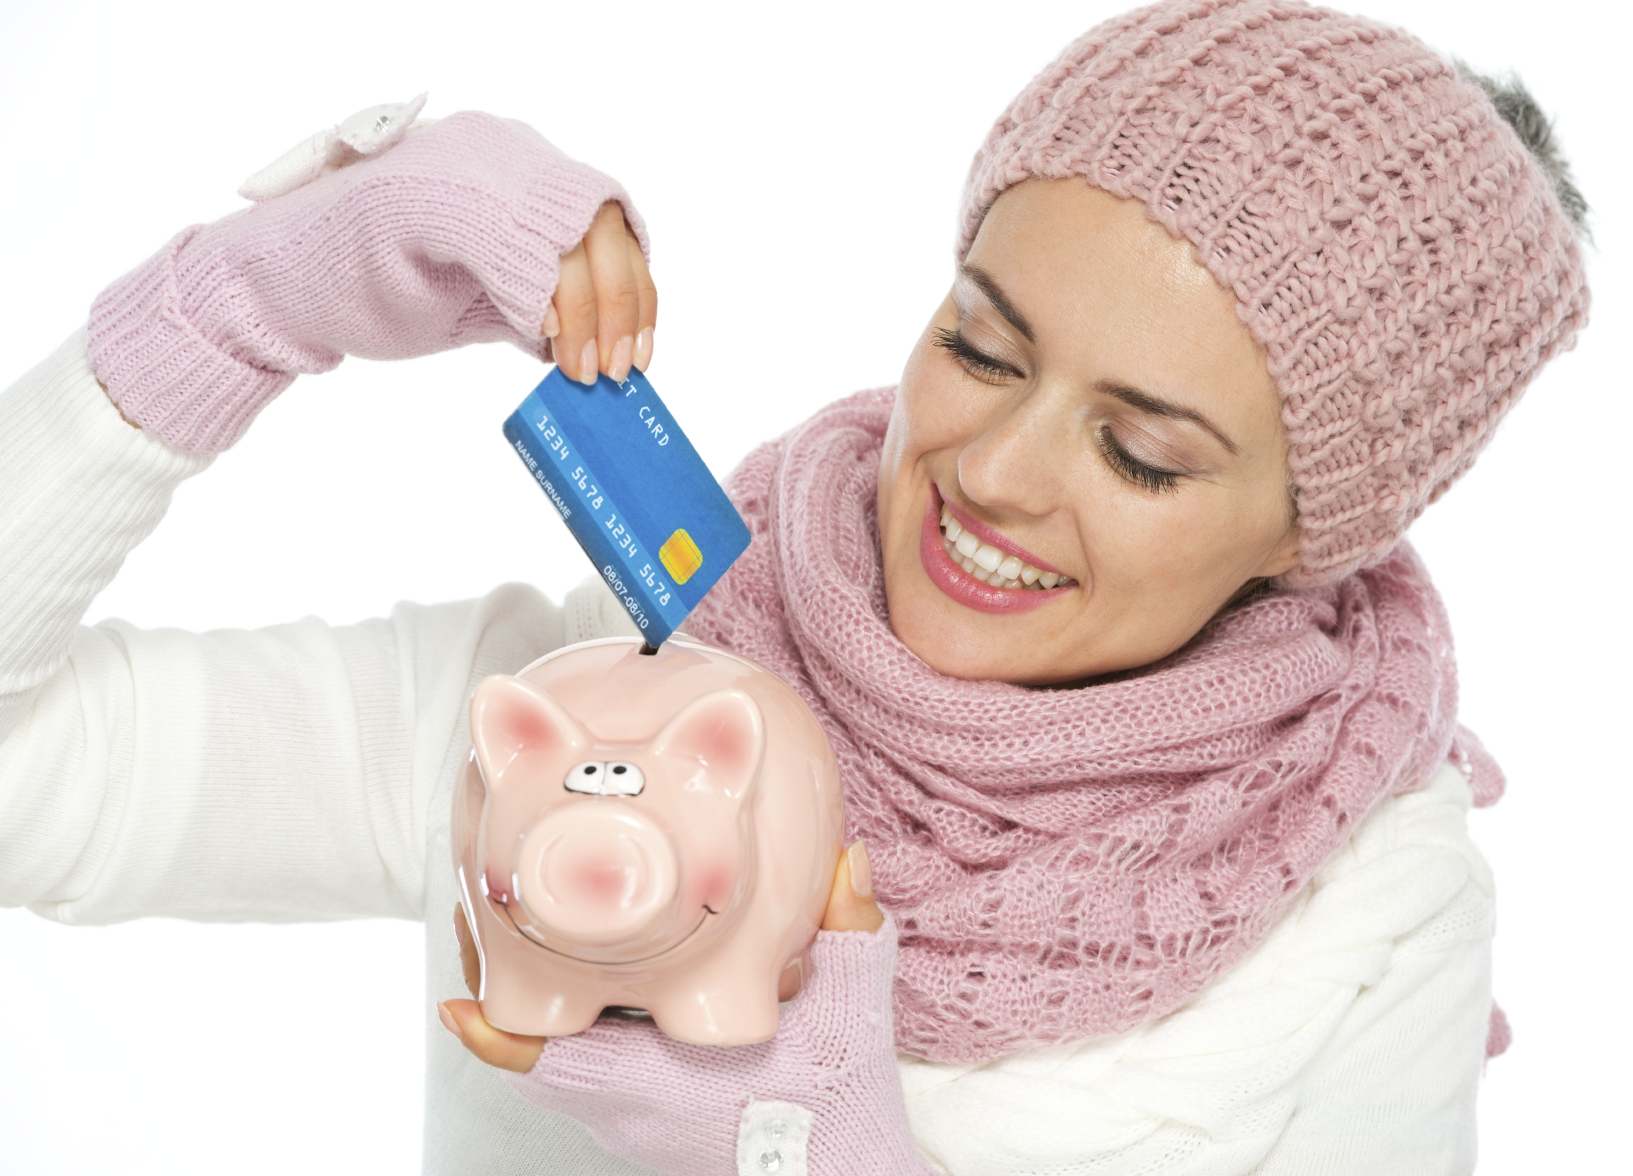 woman mother putting credit card into piggy bank saving points for traveling and airline miles